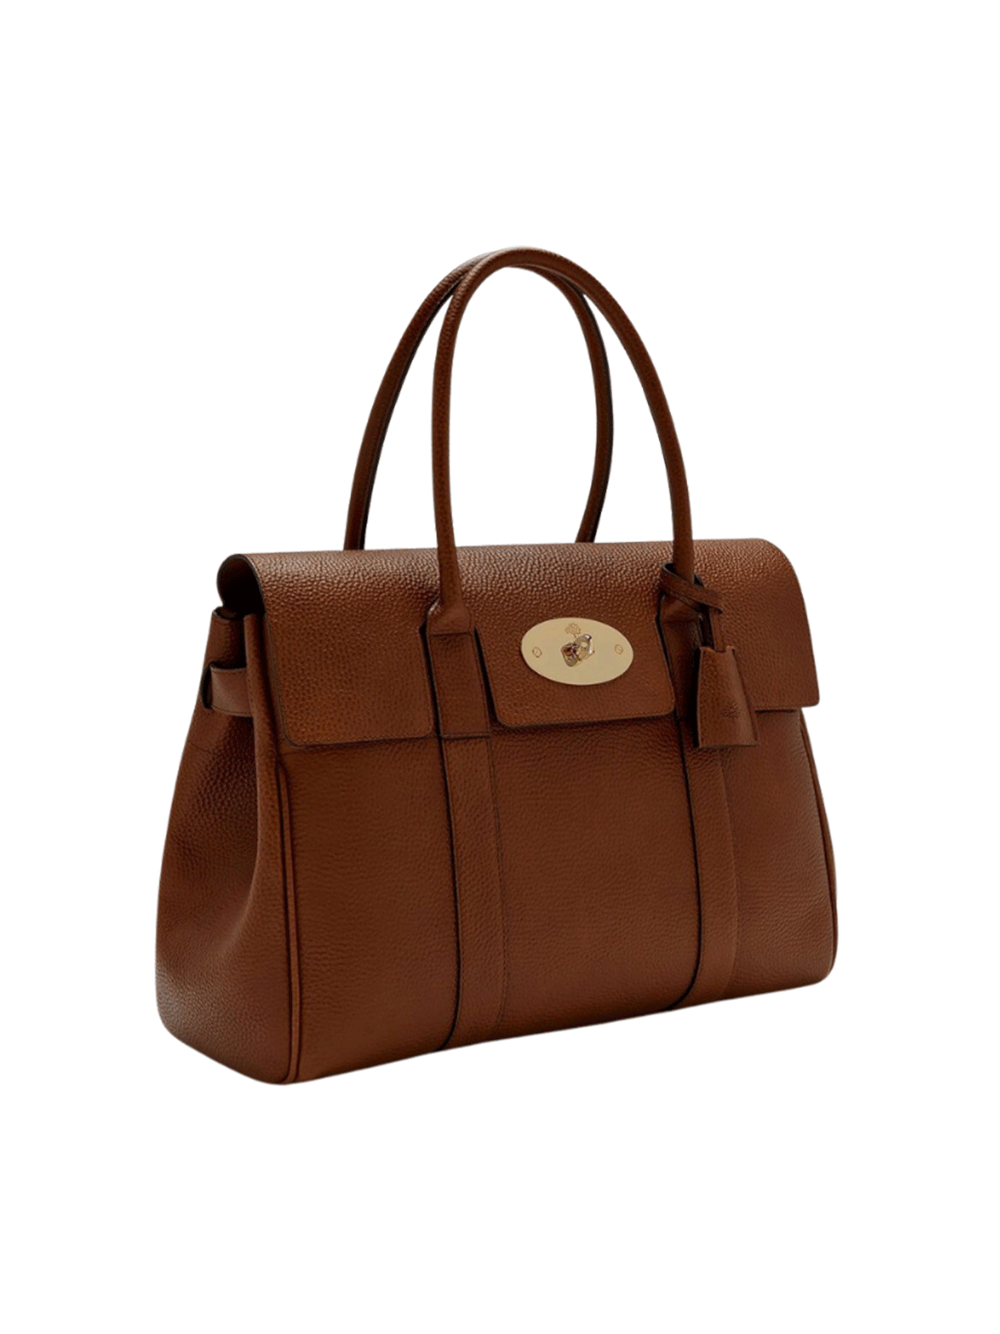 Mulberry-Bayswater-Two-Tone-Small-Classic-Grain-Brown-03